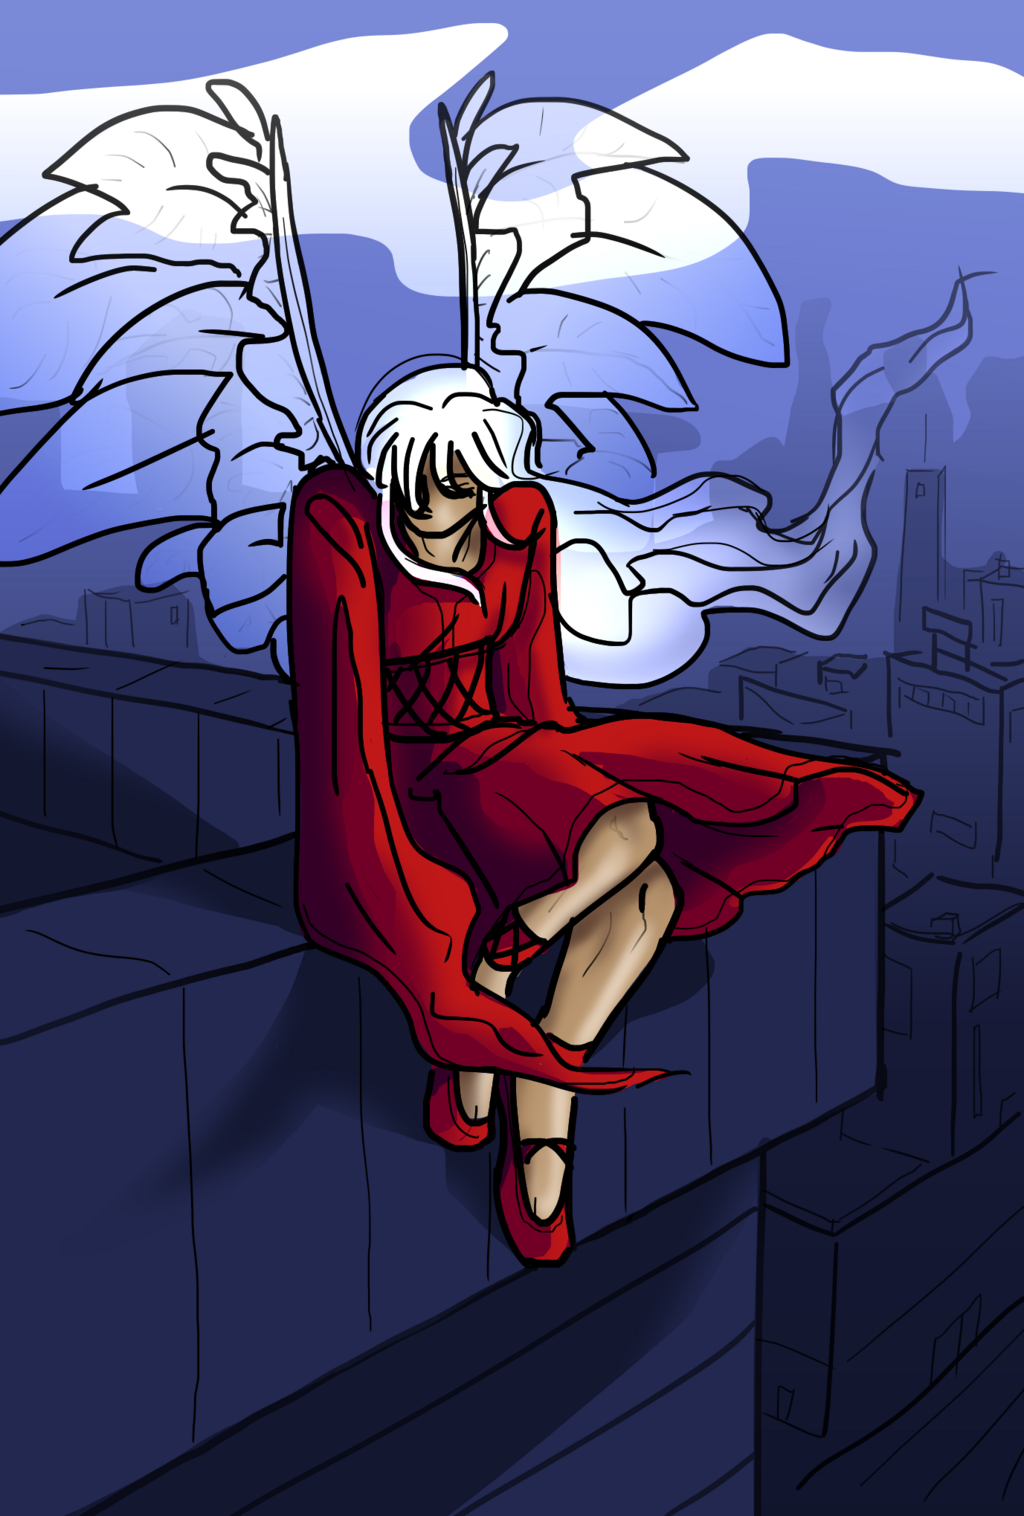 Most recent image: Roof Angel